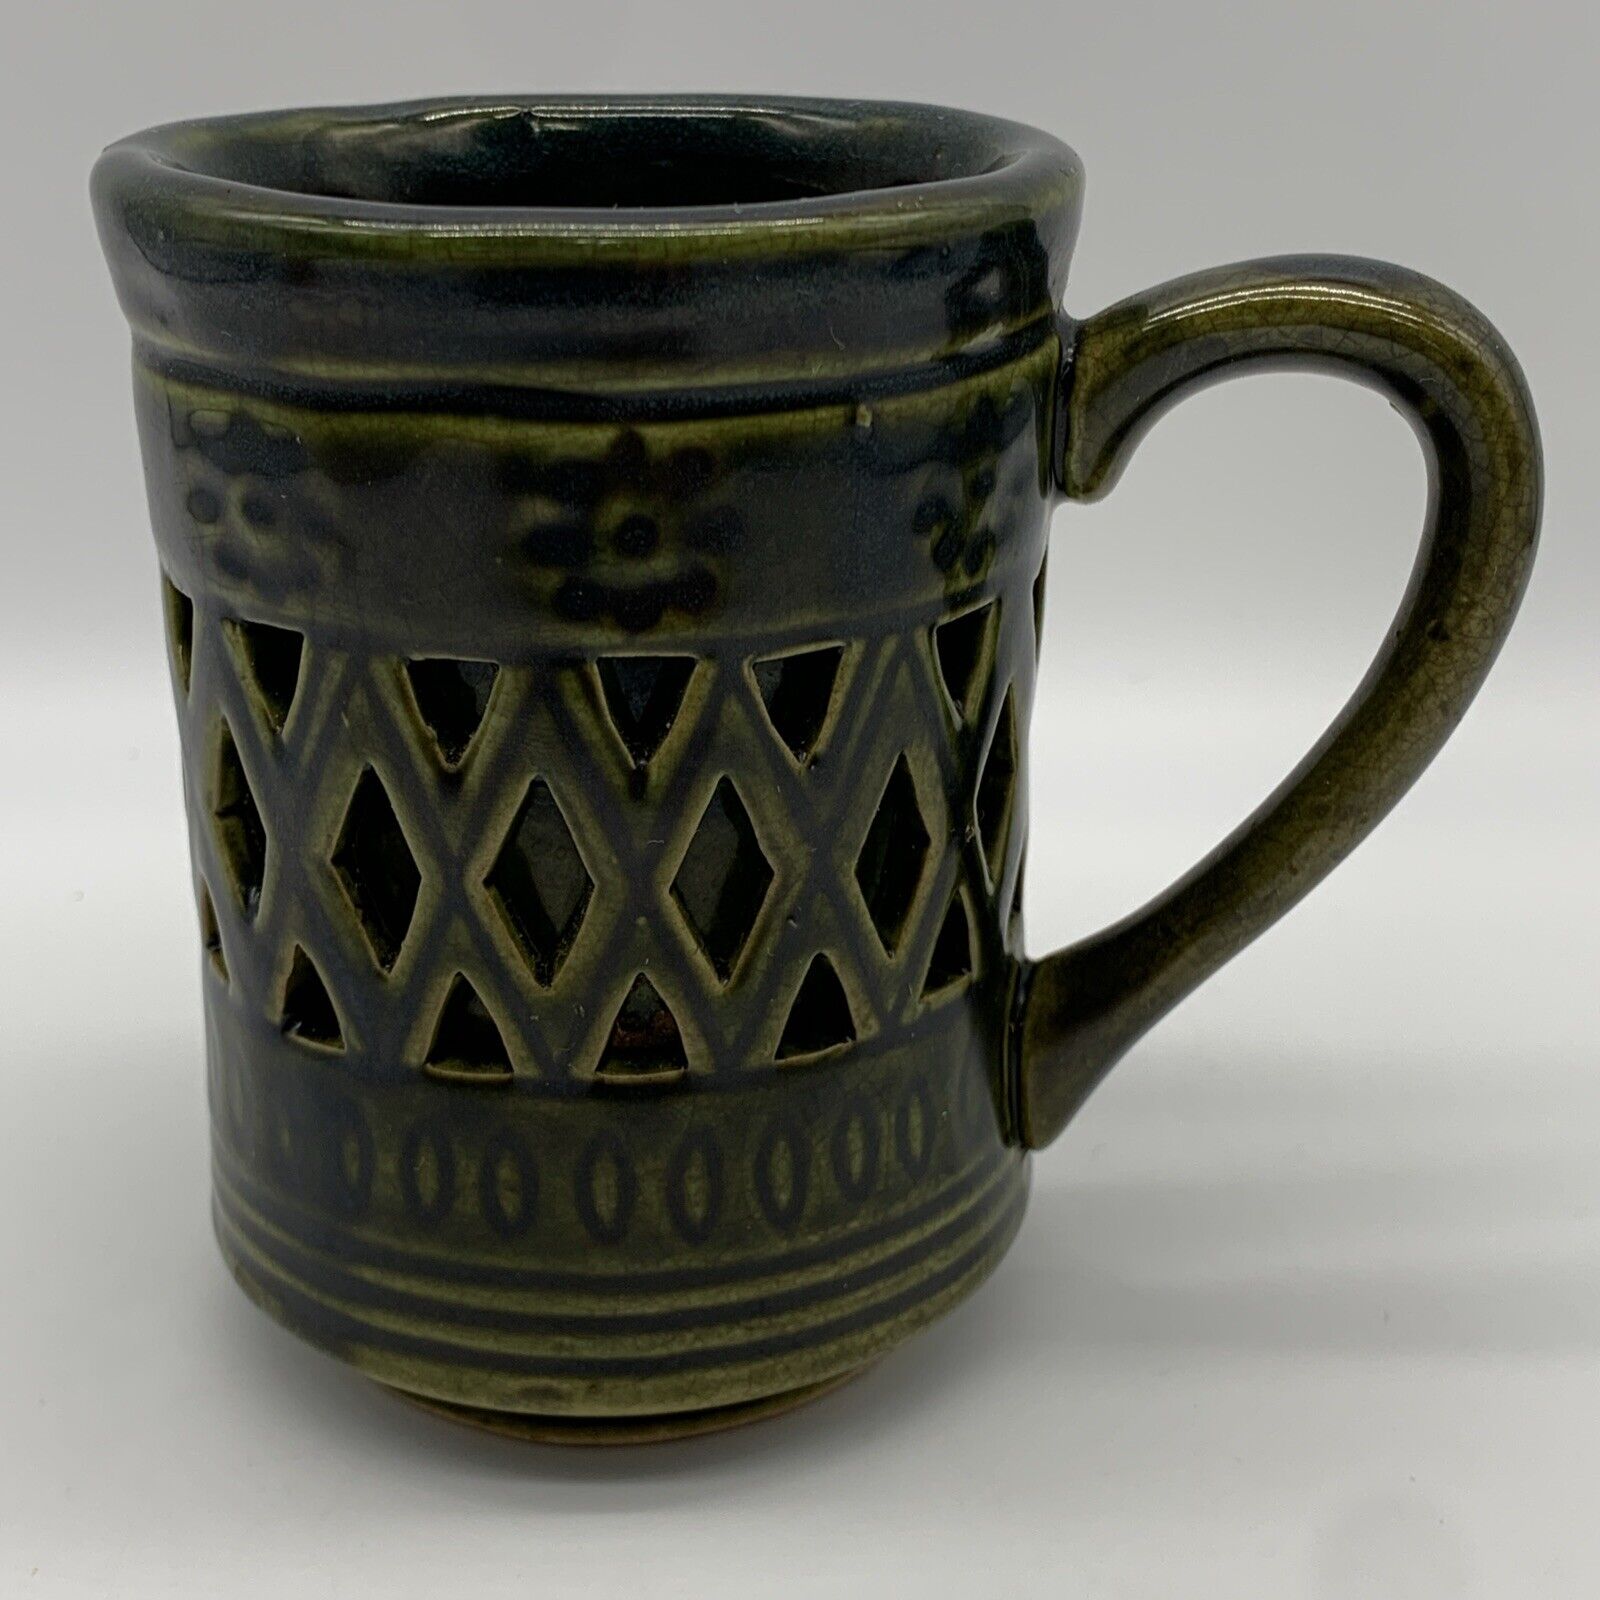 Vintage Green Ceramic Coffee Mug Double Wall with Lattice Cut Out Detail